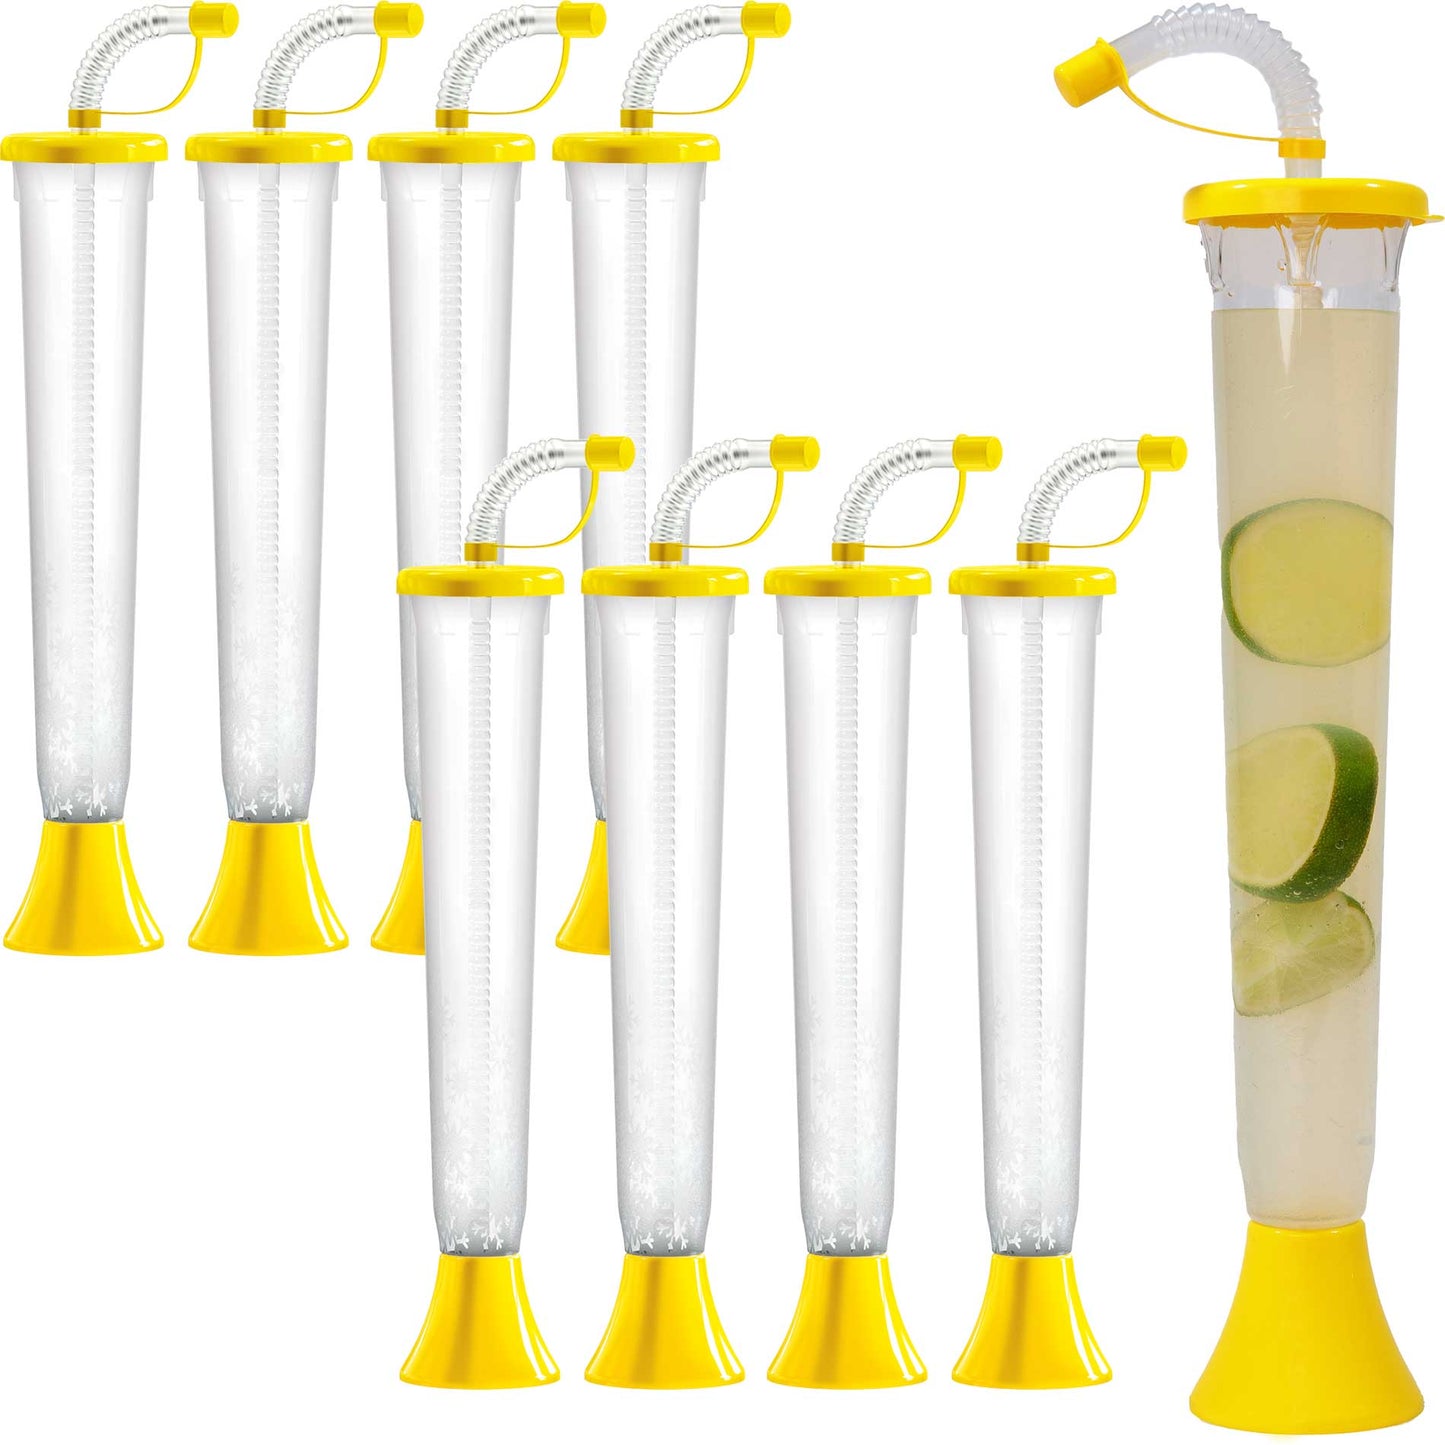 https://noveltycupsusa.com/cdn/shop/files/sweet-world-usa-yard-cups-54-or-108-cups-yard-cups-with-yellow-lids-and-straws-14oz-for-margaritas-and-frozen-drinks-cups-with-lids-and-straws-35523778609311.jpg?v=1684775852&width=1445